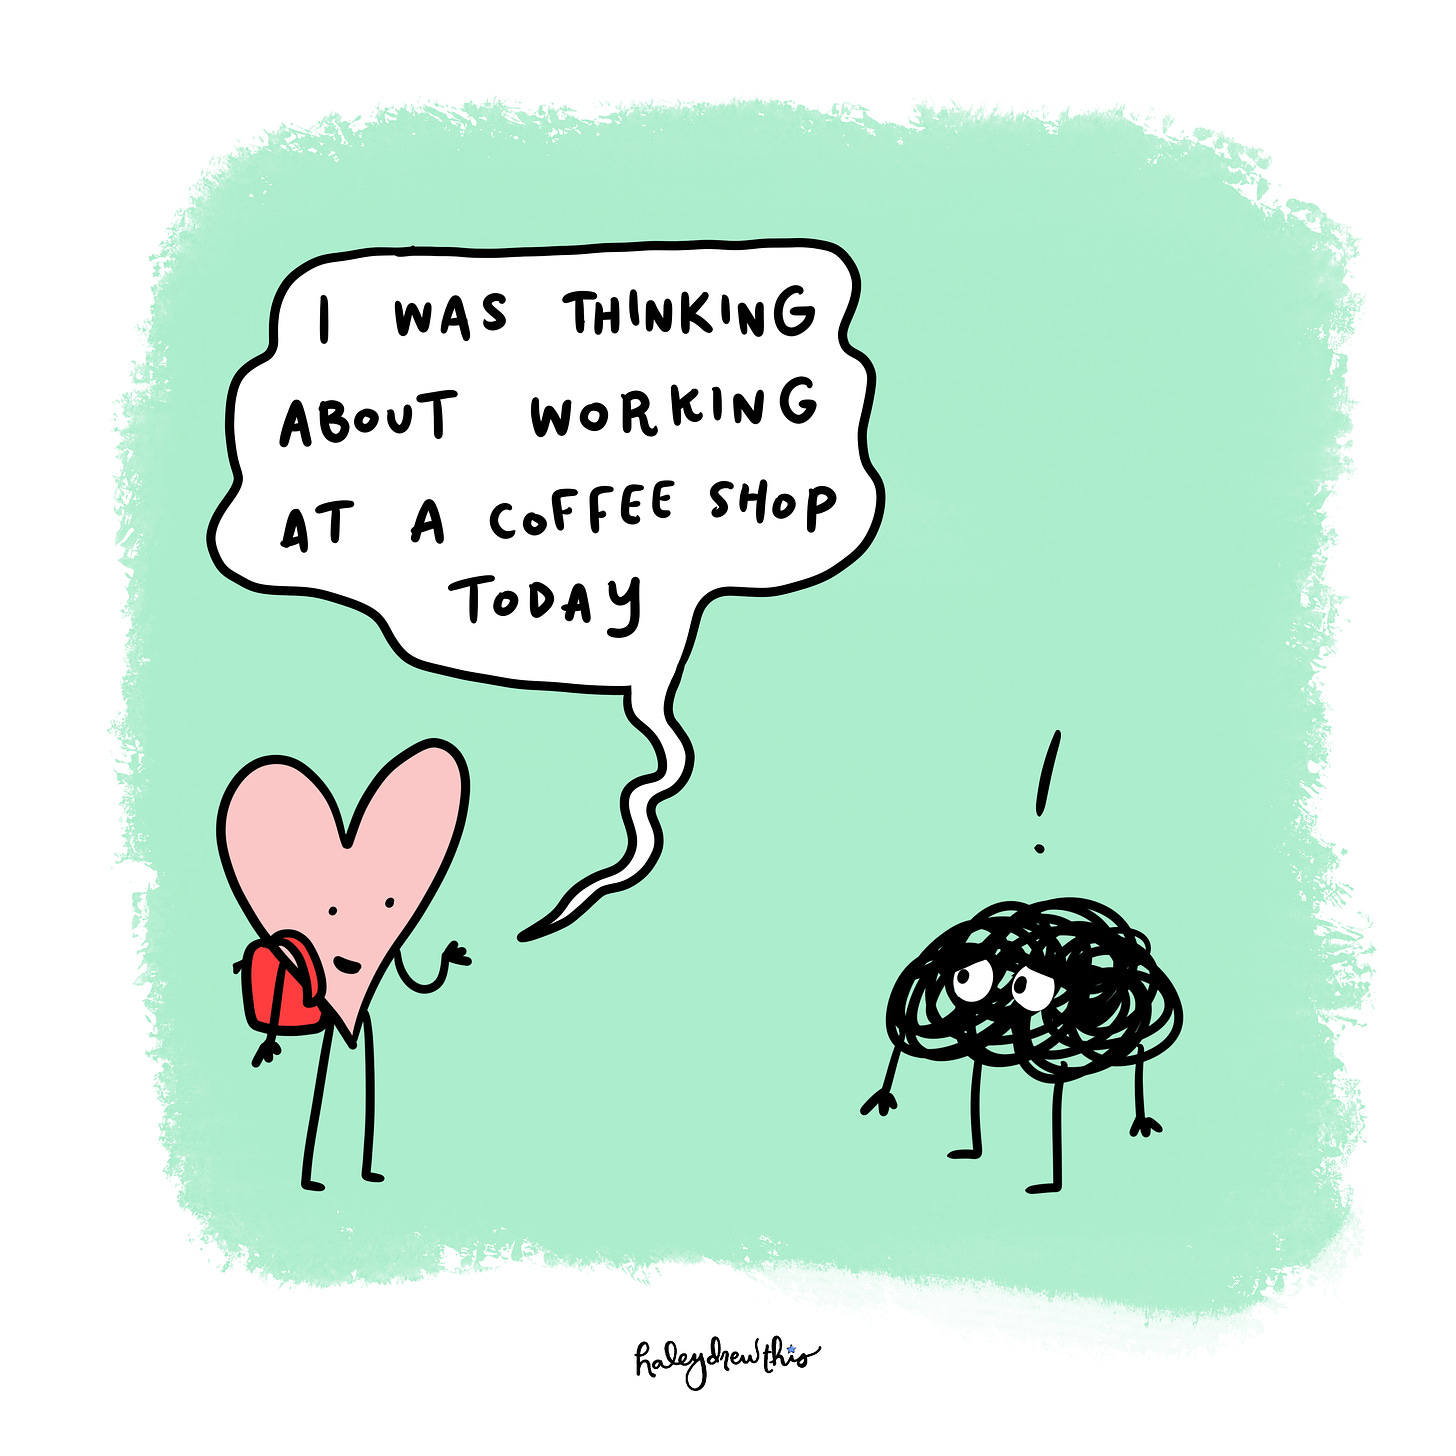 Pink heart says “I was thinking of working from a  coffee shop today!” Anxiety looks worried.